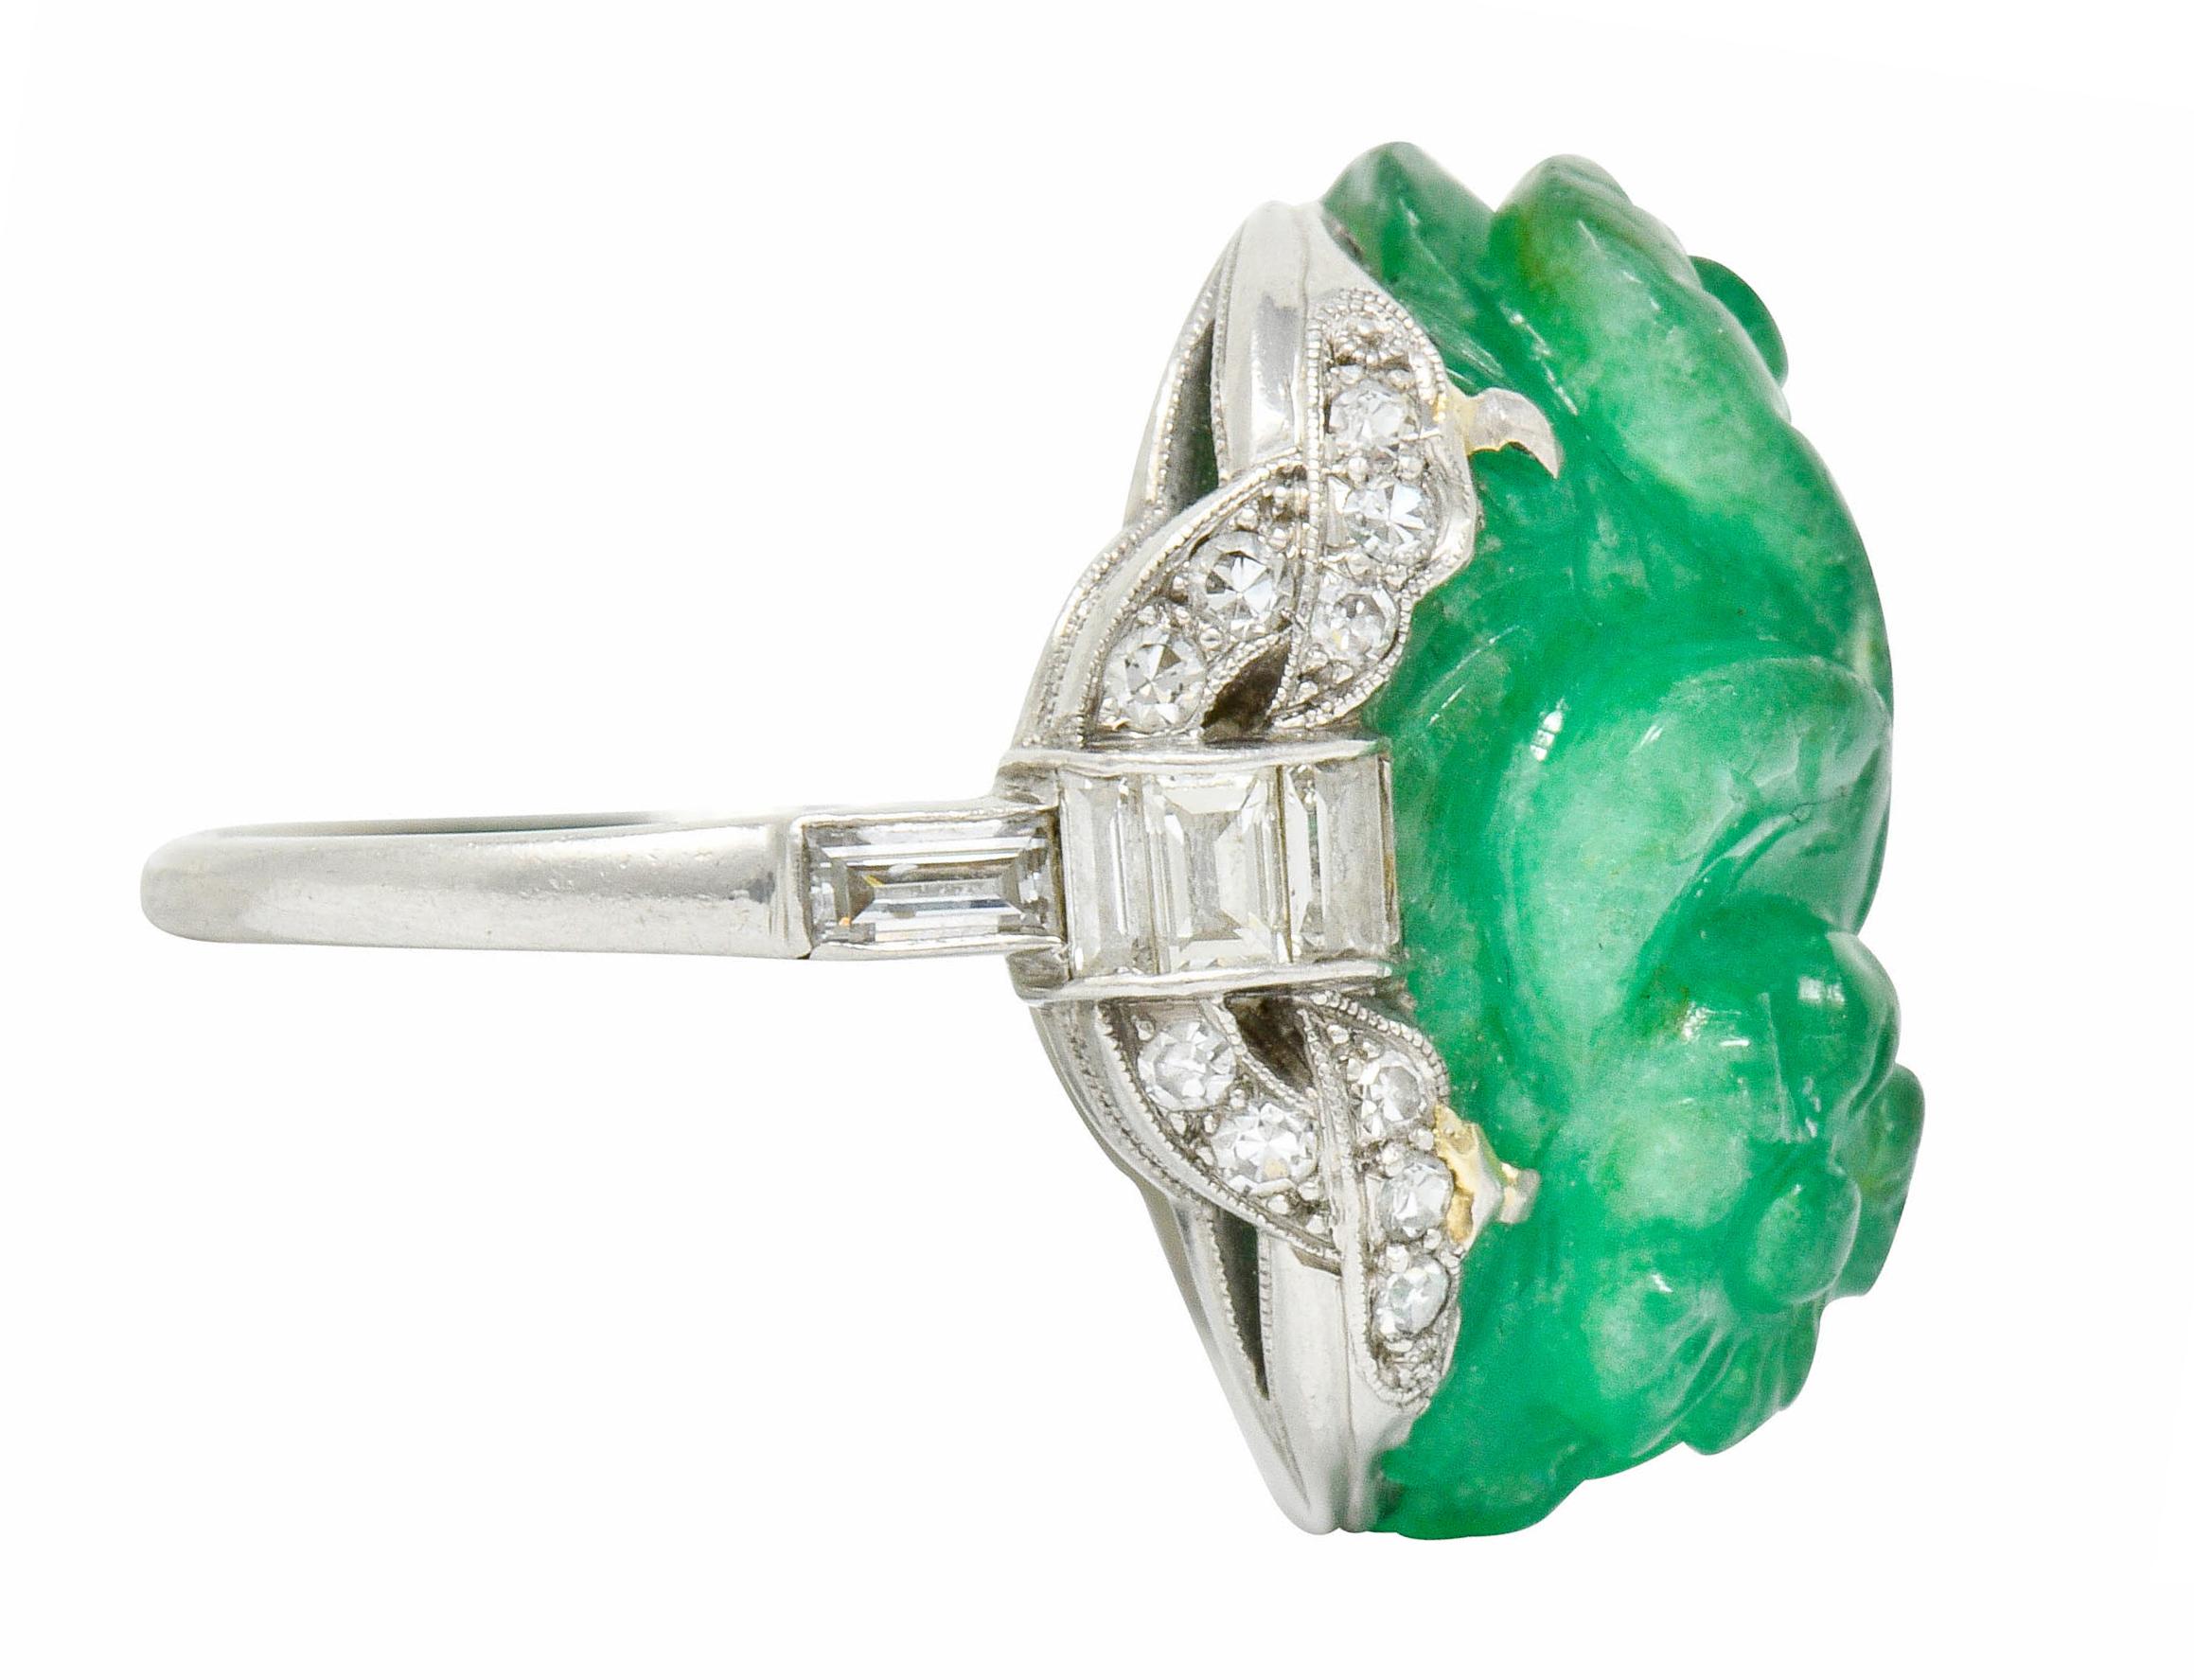 Mixed Cut Art Deco 15.60 Carat Carved Colombian Emerald Diamond Platinum Cocktail Ring